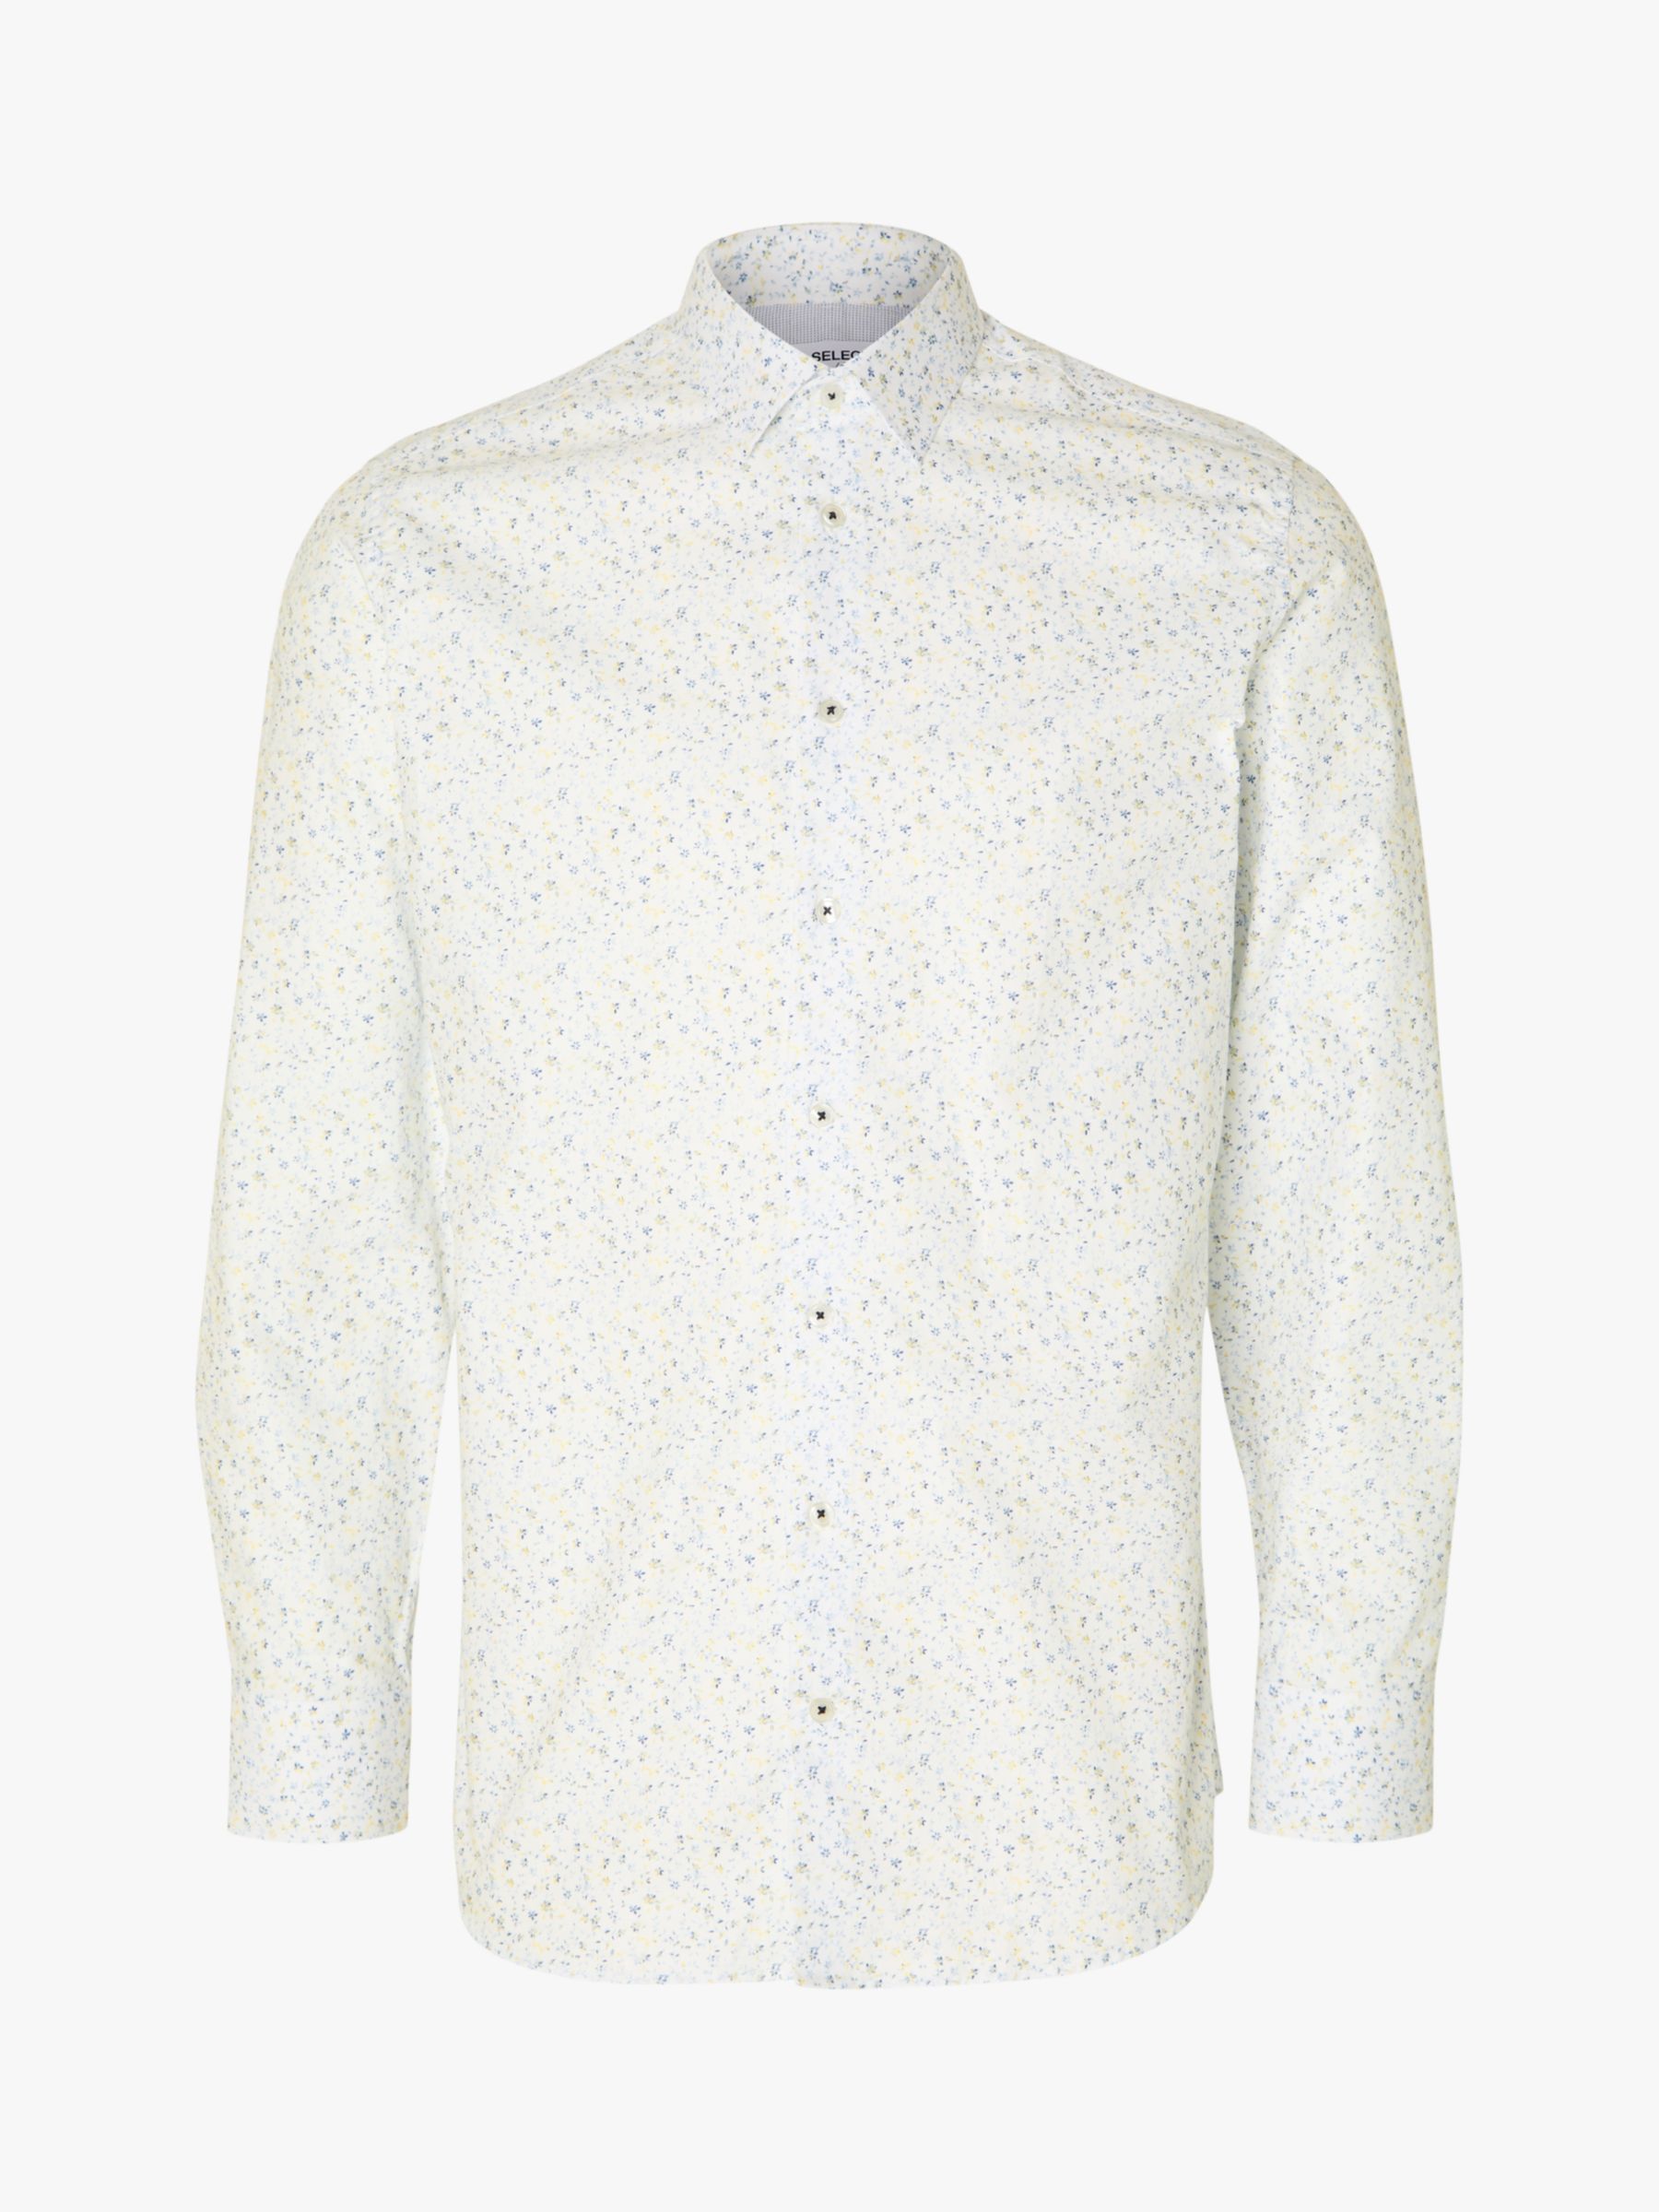 Buy SELECTED HOMME Slim Fit Long Sleeve Floral Shirt, White Online at johnlewis.com